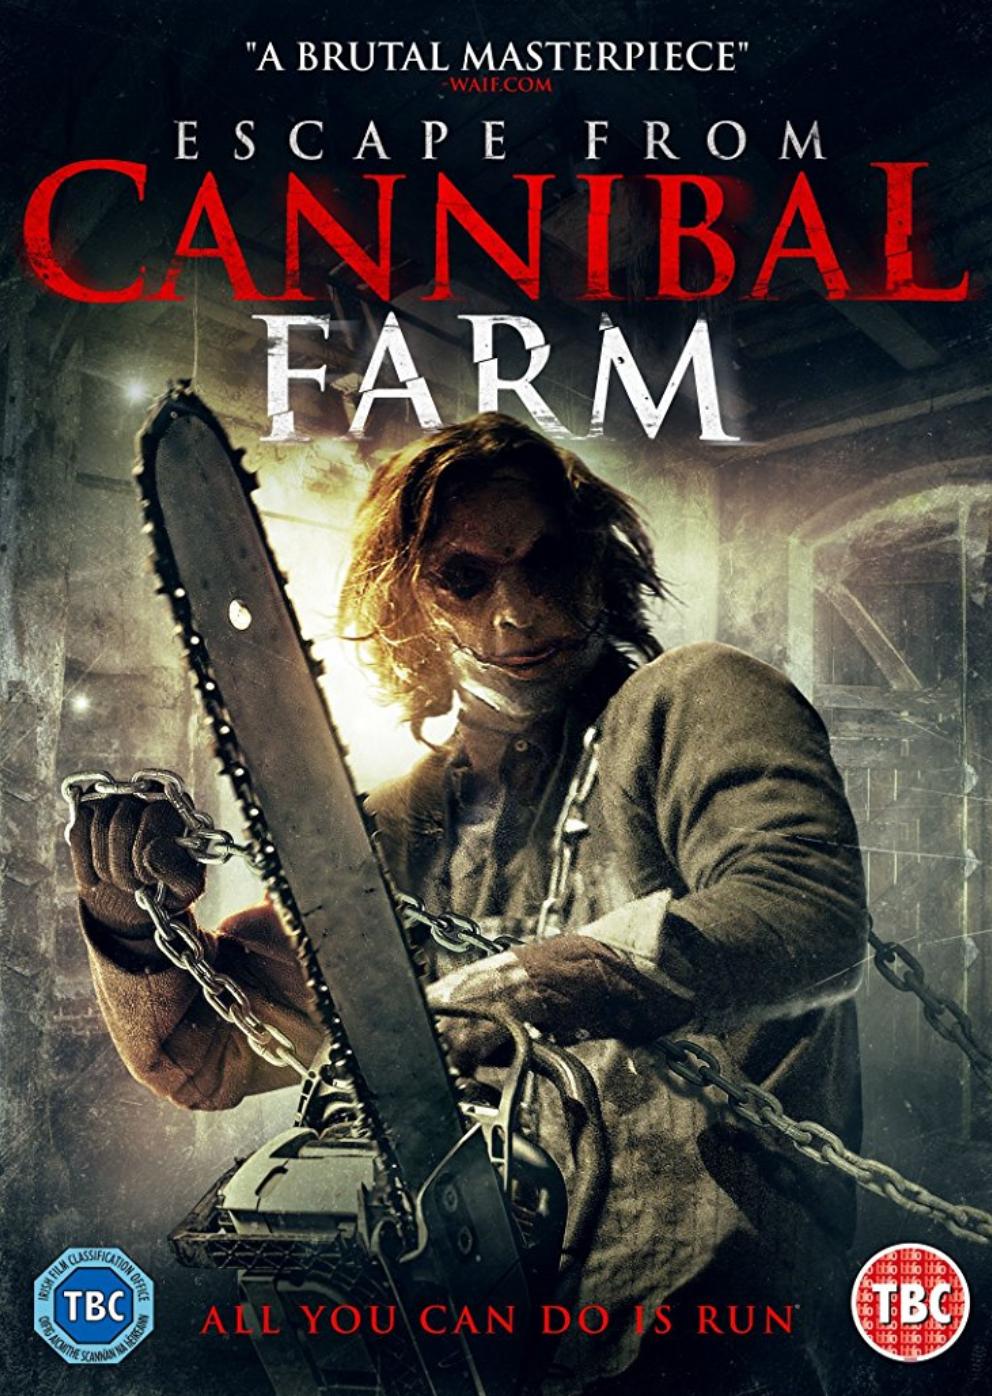 Escape from Cannibal Farm 2017 UNRATED Hindi ORG Dual Audio 720p | 480p HDRip ESub Download